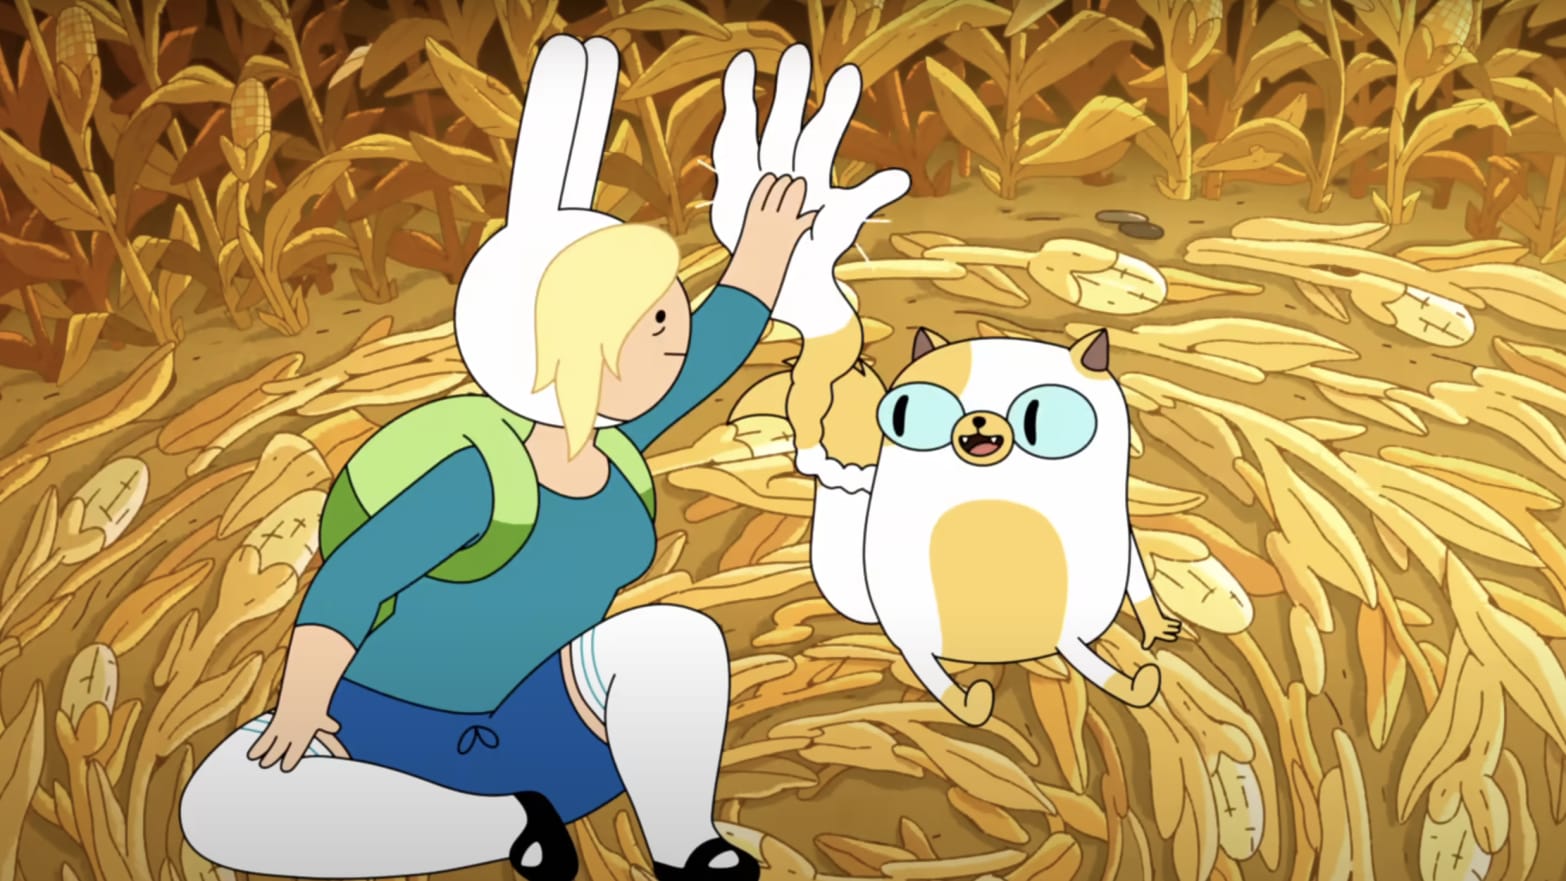 Adventure Time: Fionna and Cake - Metacritic